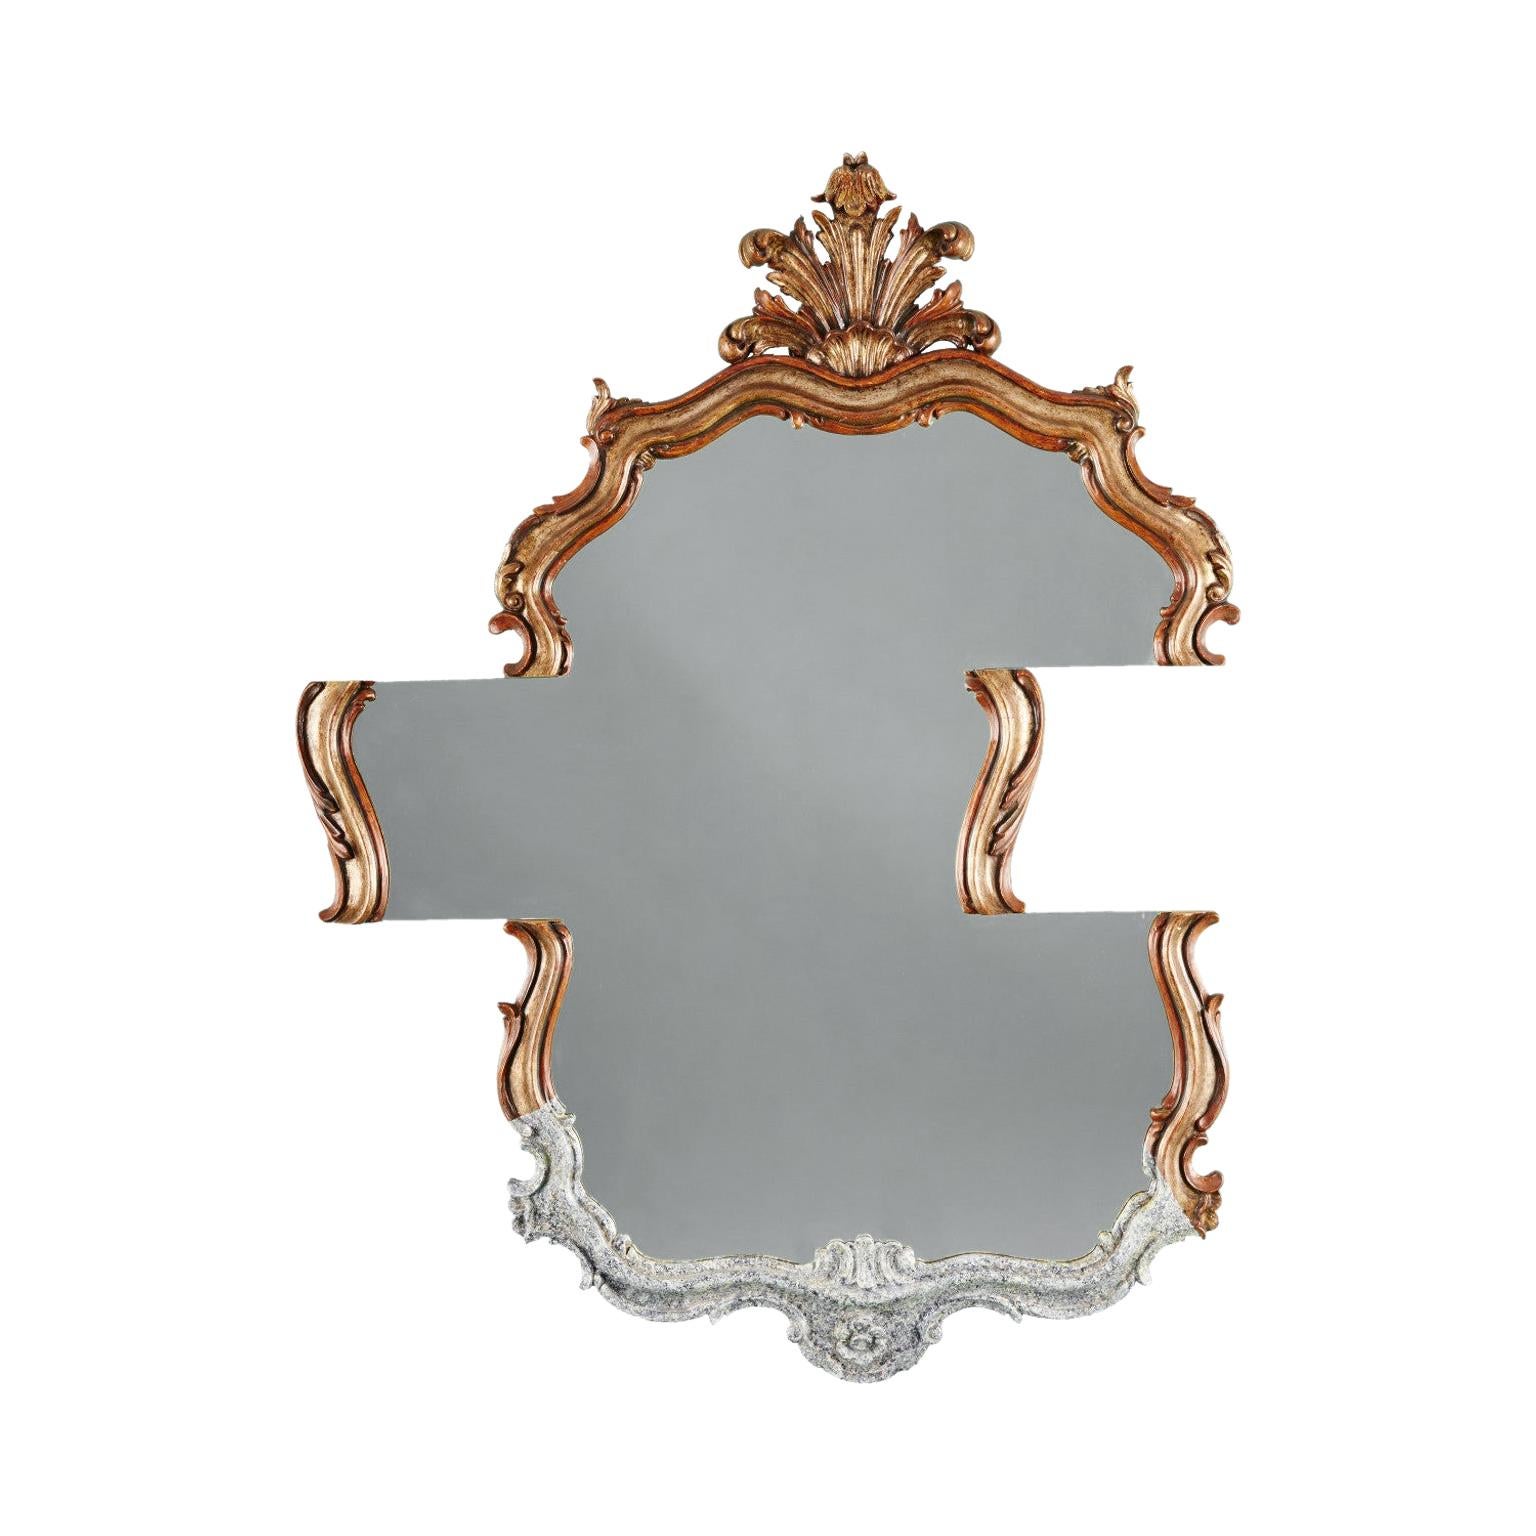 Contemporary Wall Mirror with Slid Antique Giltwood and Faux Marble Frame For Sale